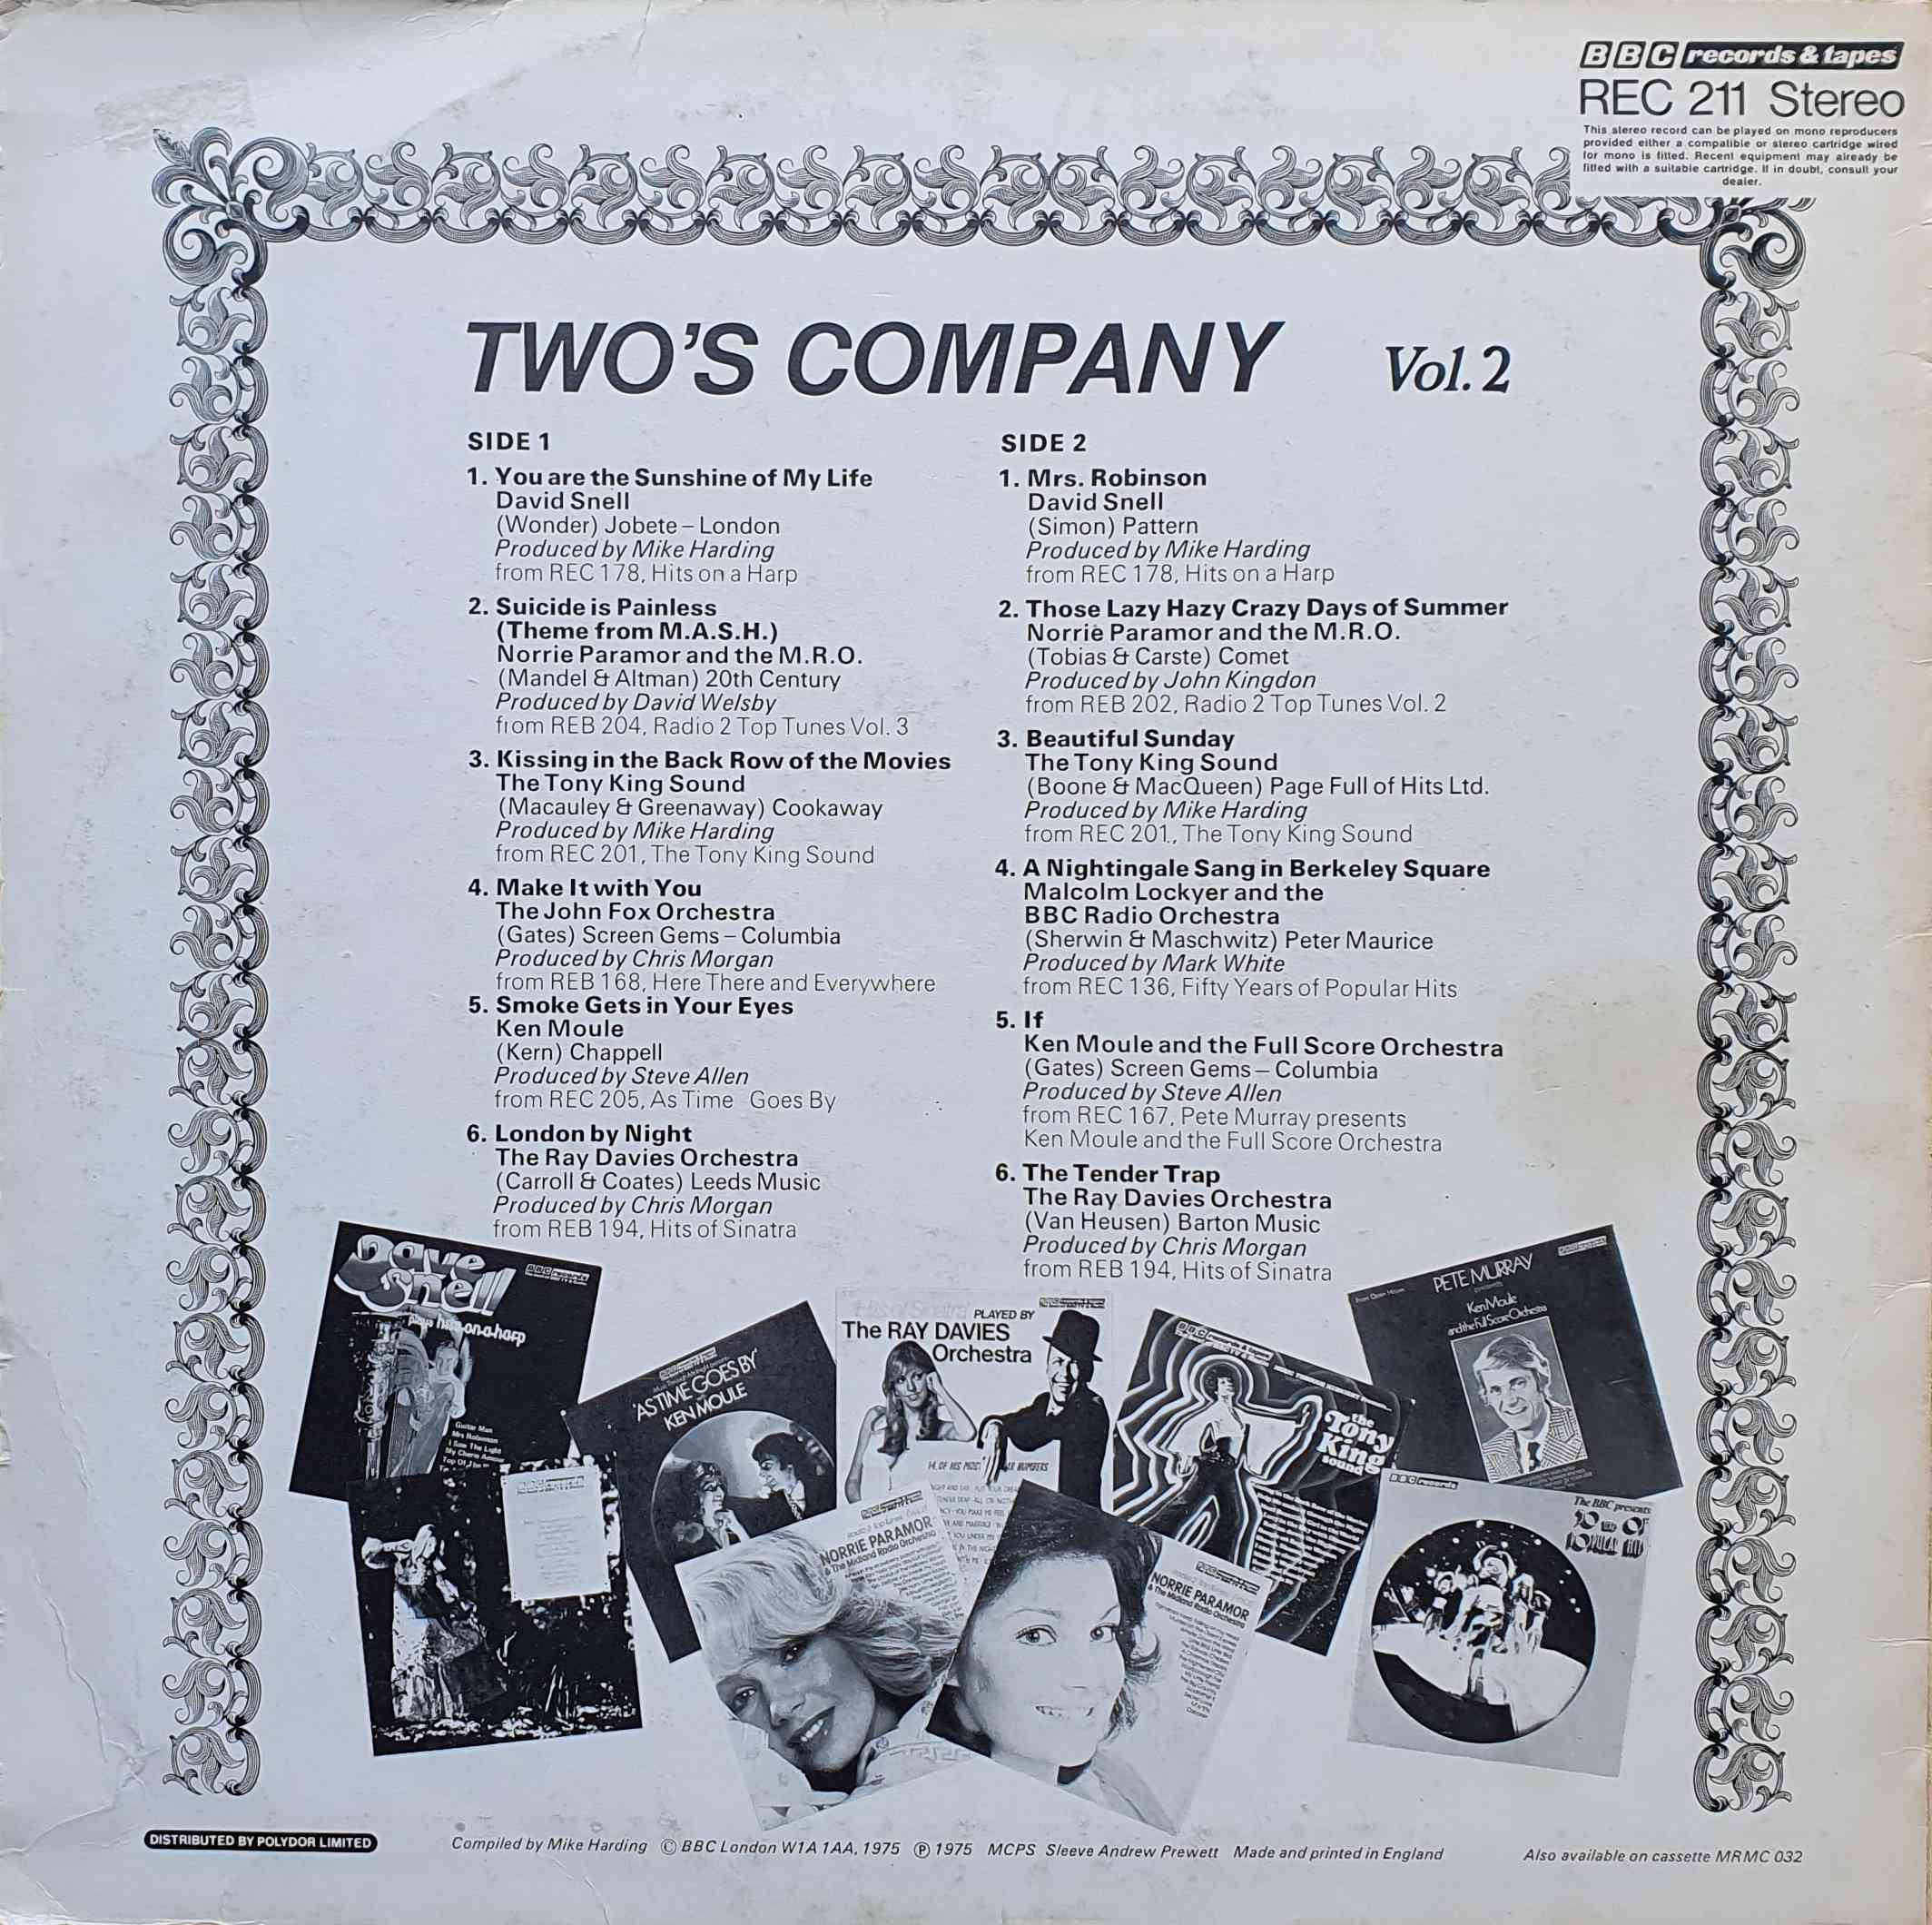 Picture of REC 211 Two's company - Volume 2 by artist Various from the BBC records and Tapes library